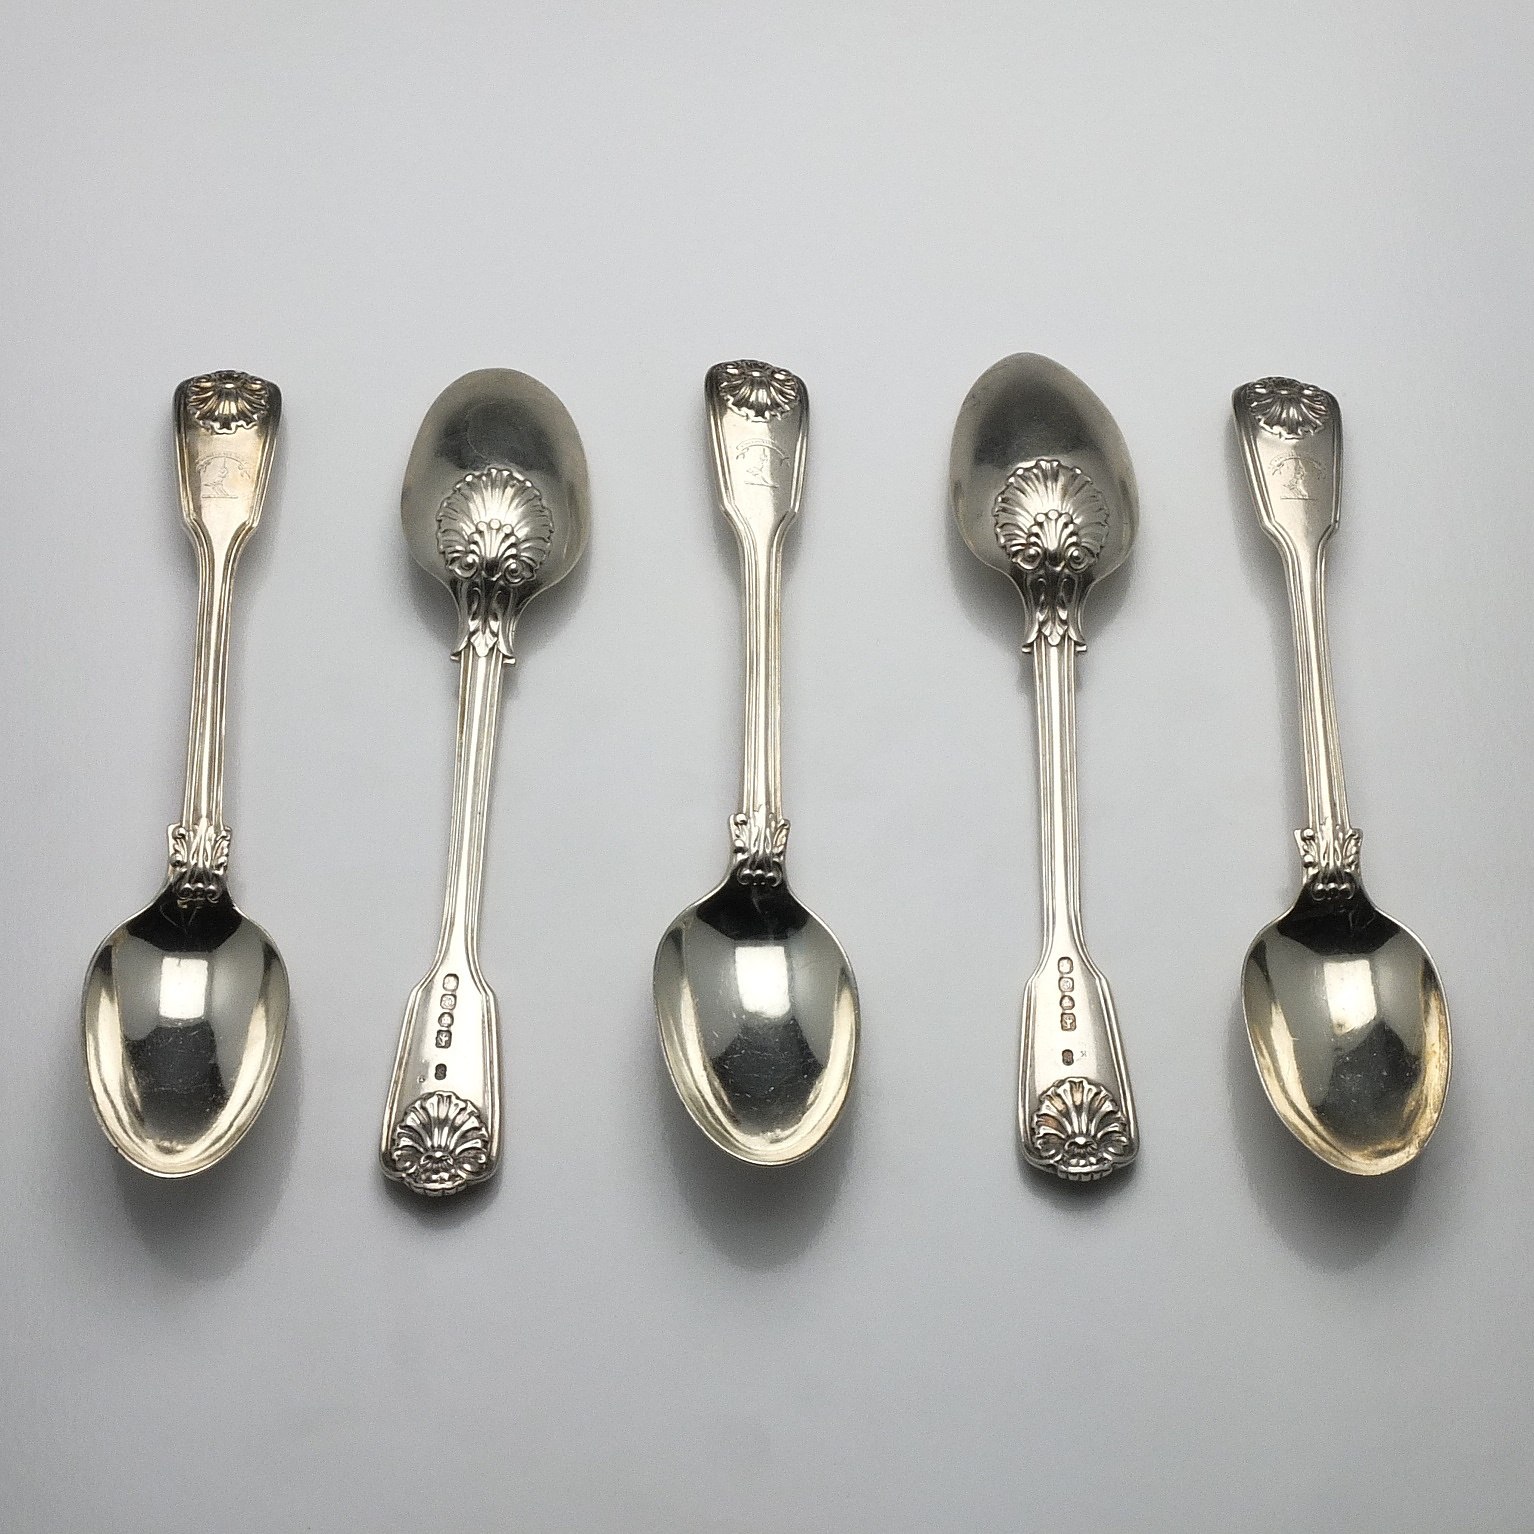 'Five Victorian Crested Sterling Silver Spoons Chawner & Co and Mary Chawner & George W Adams London 1838'